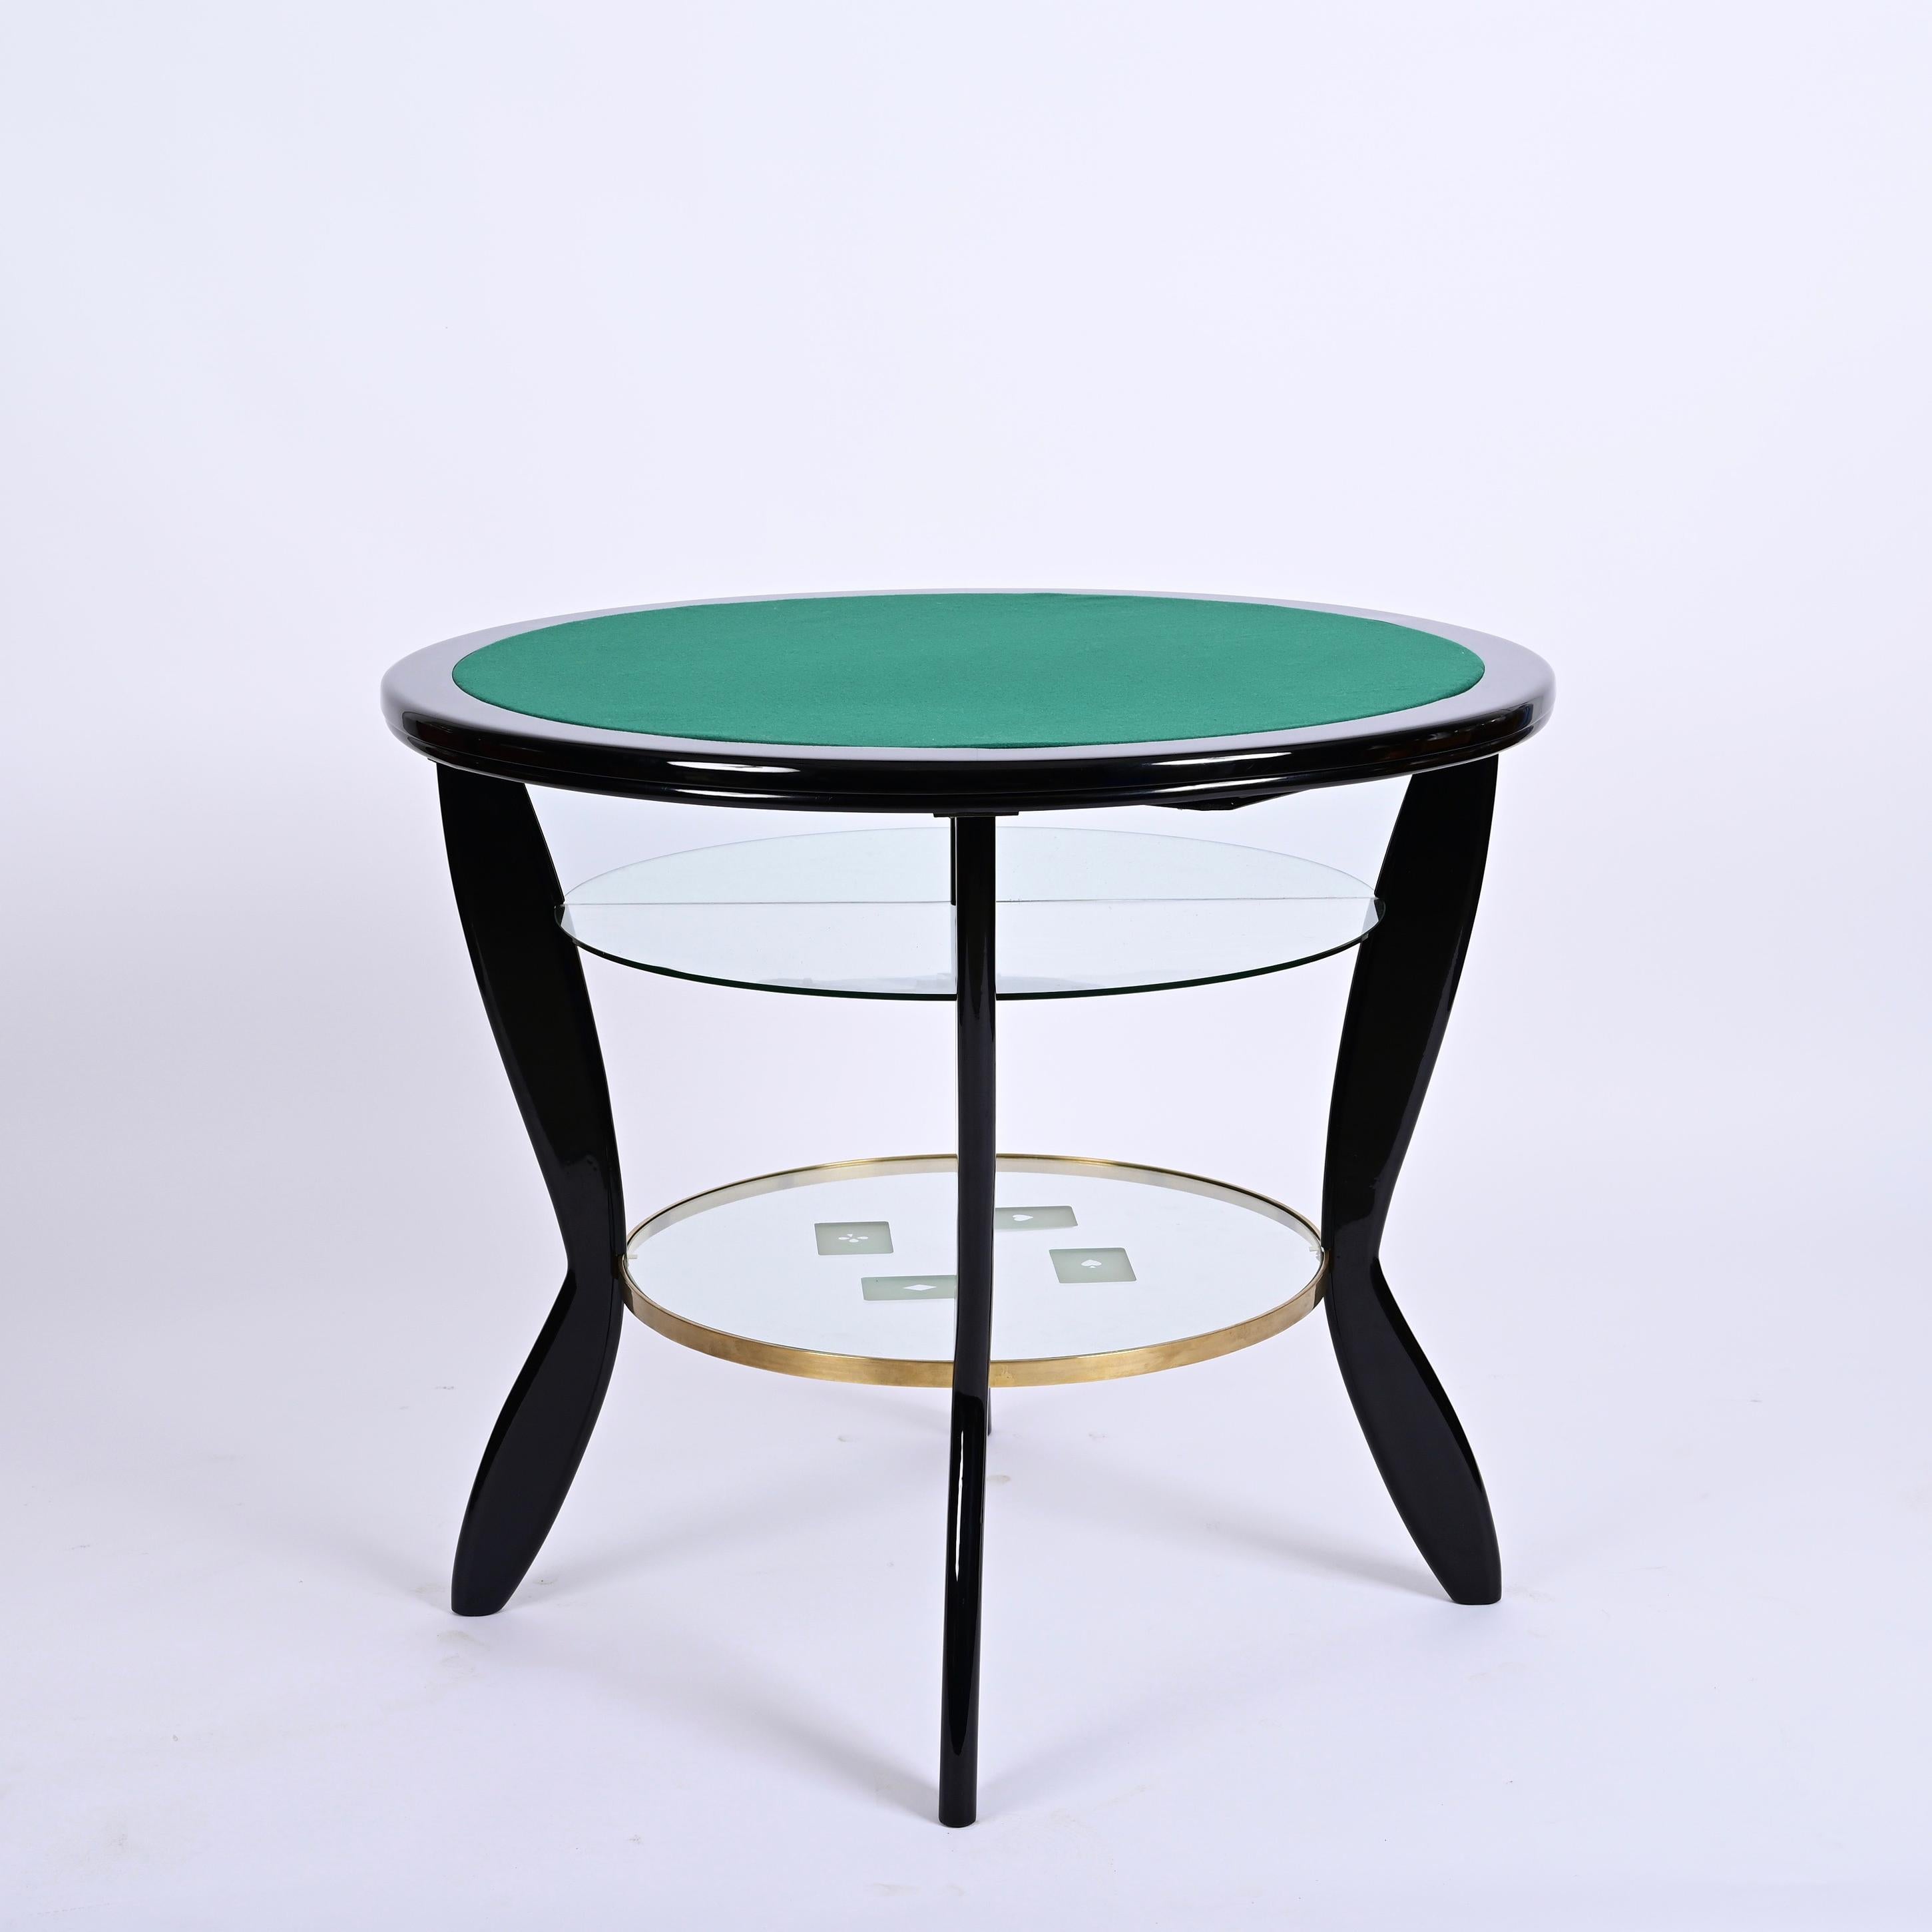 Incredible midcentury round ebonized beech and brass game table with two glass shelves. This fantastic table is designed in the style of Gio Ponti and was produced in Italy during the 1950s. 

This piece is an authentic masterpiece: a breathtaking